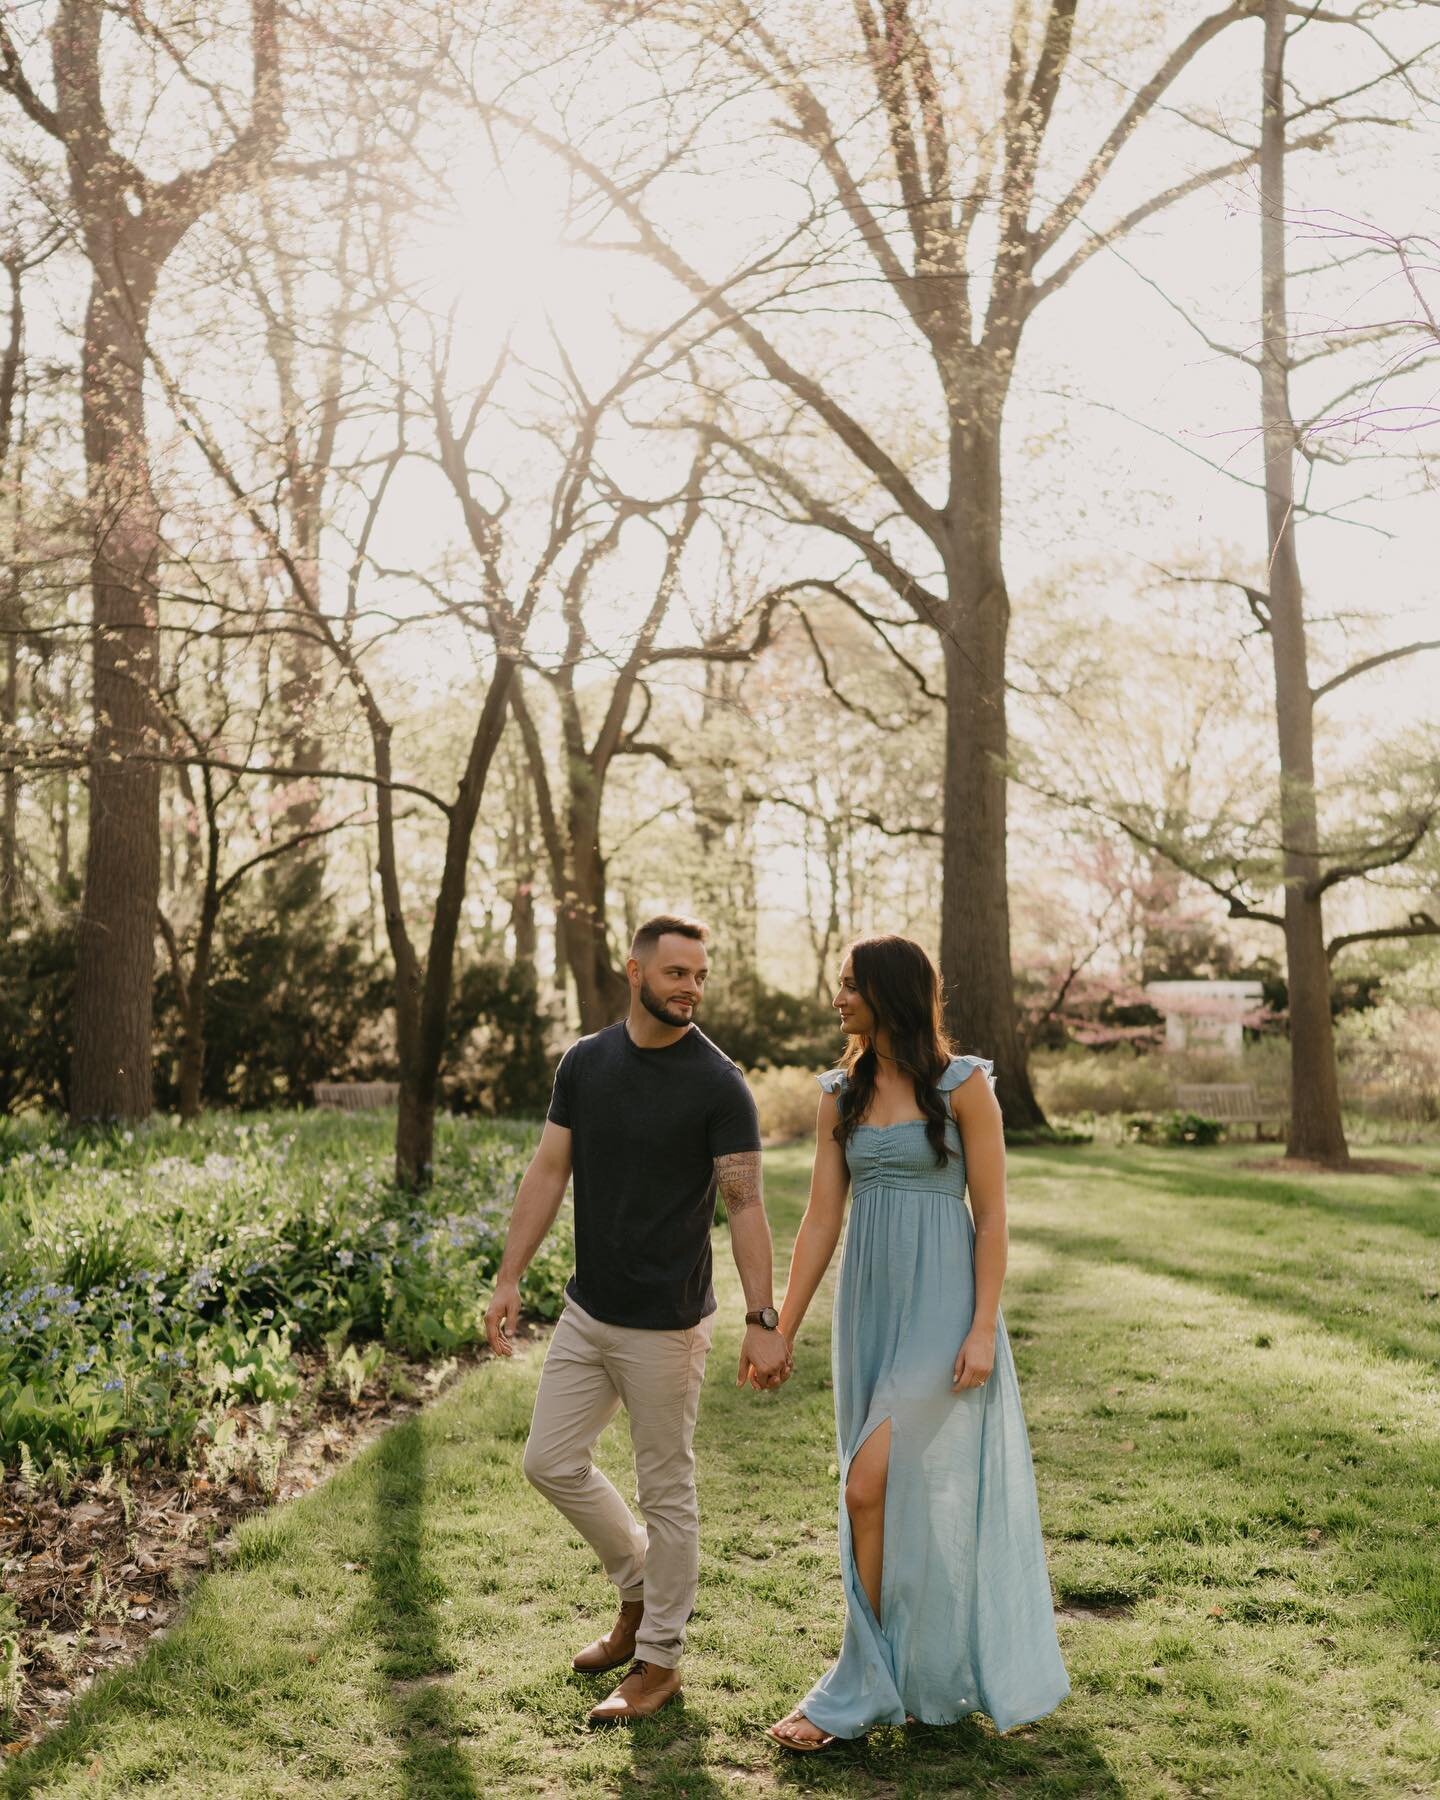 Something about those pretty spring sessions 💐
.
.
.
#engagementphotos #engagementshoot #engagementphotkgraphy #springphotography #springphotoshoot #prettyinpink #2023weddingseason #2023bride #2023groom #newfields